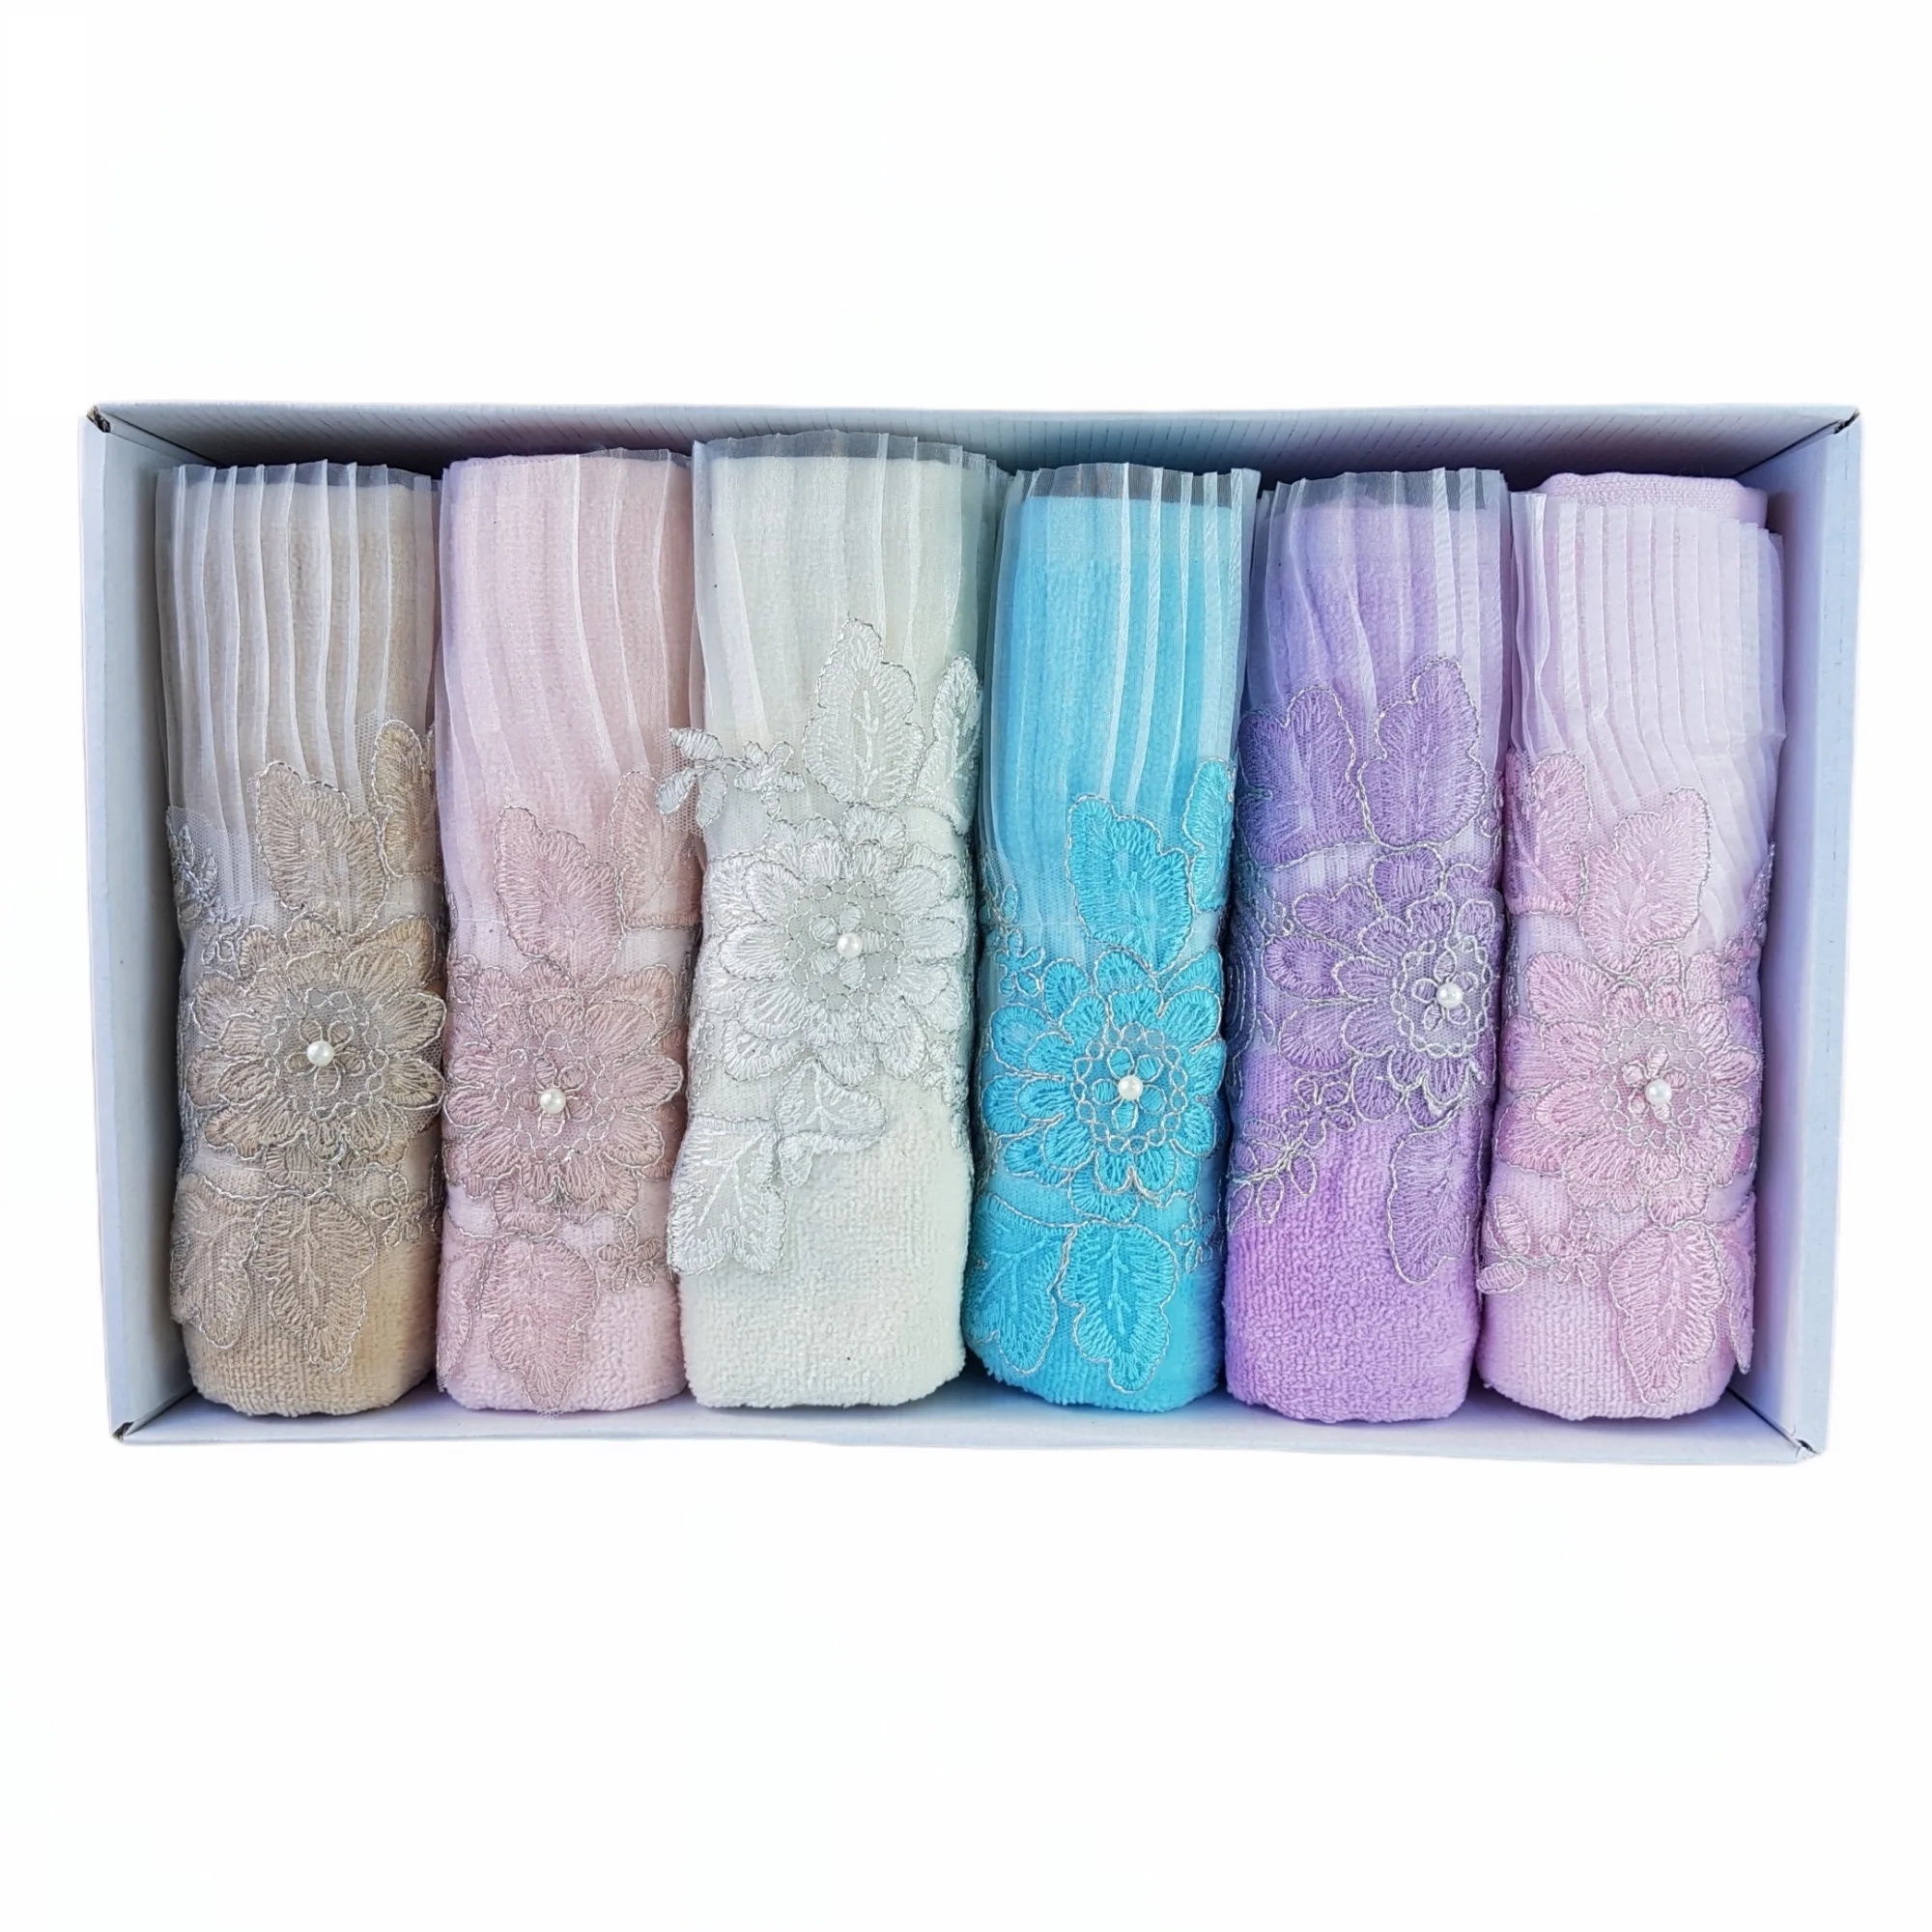 

Madem 50*90 Cm 6 Pcs/Packs Towel Set High Quality %100 Cotton Lace Pattern Thick Soft Super Absorbent Turkish Face Hand Bathroom